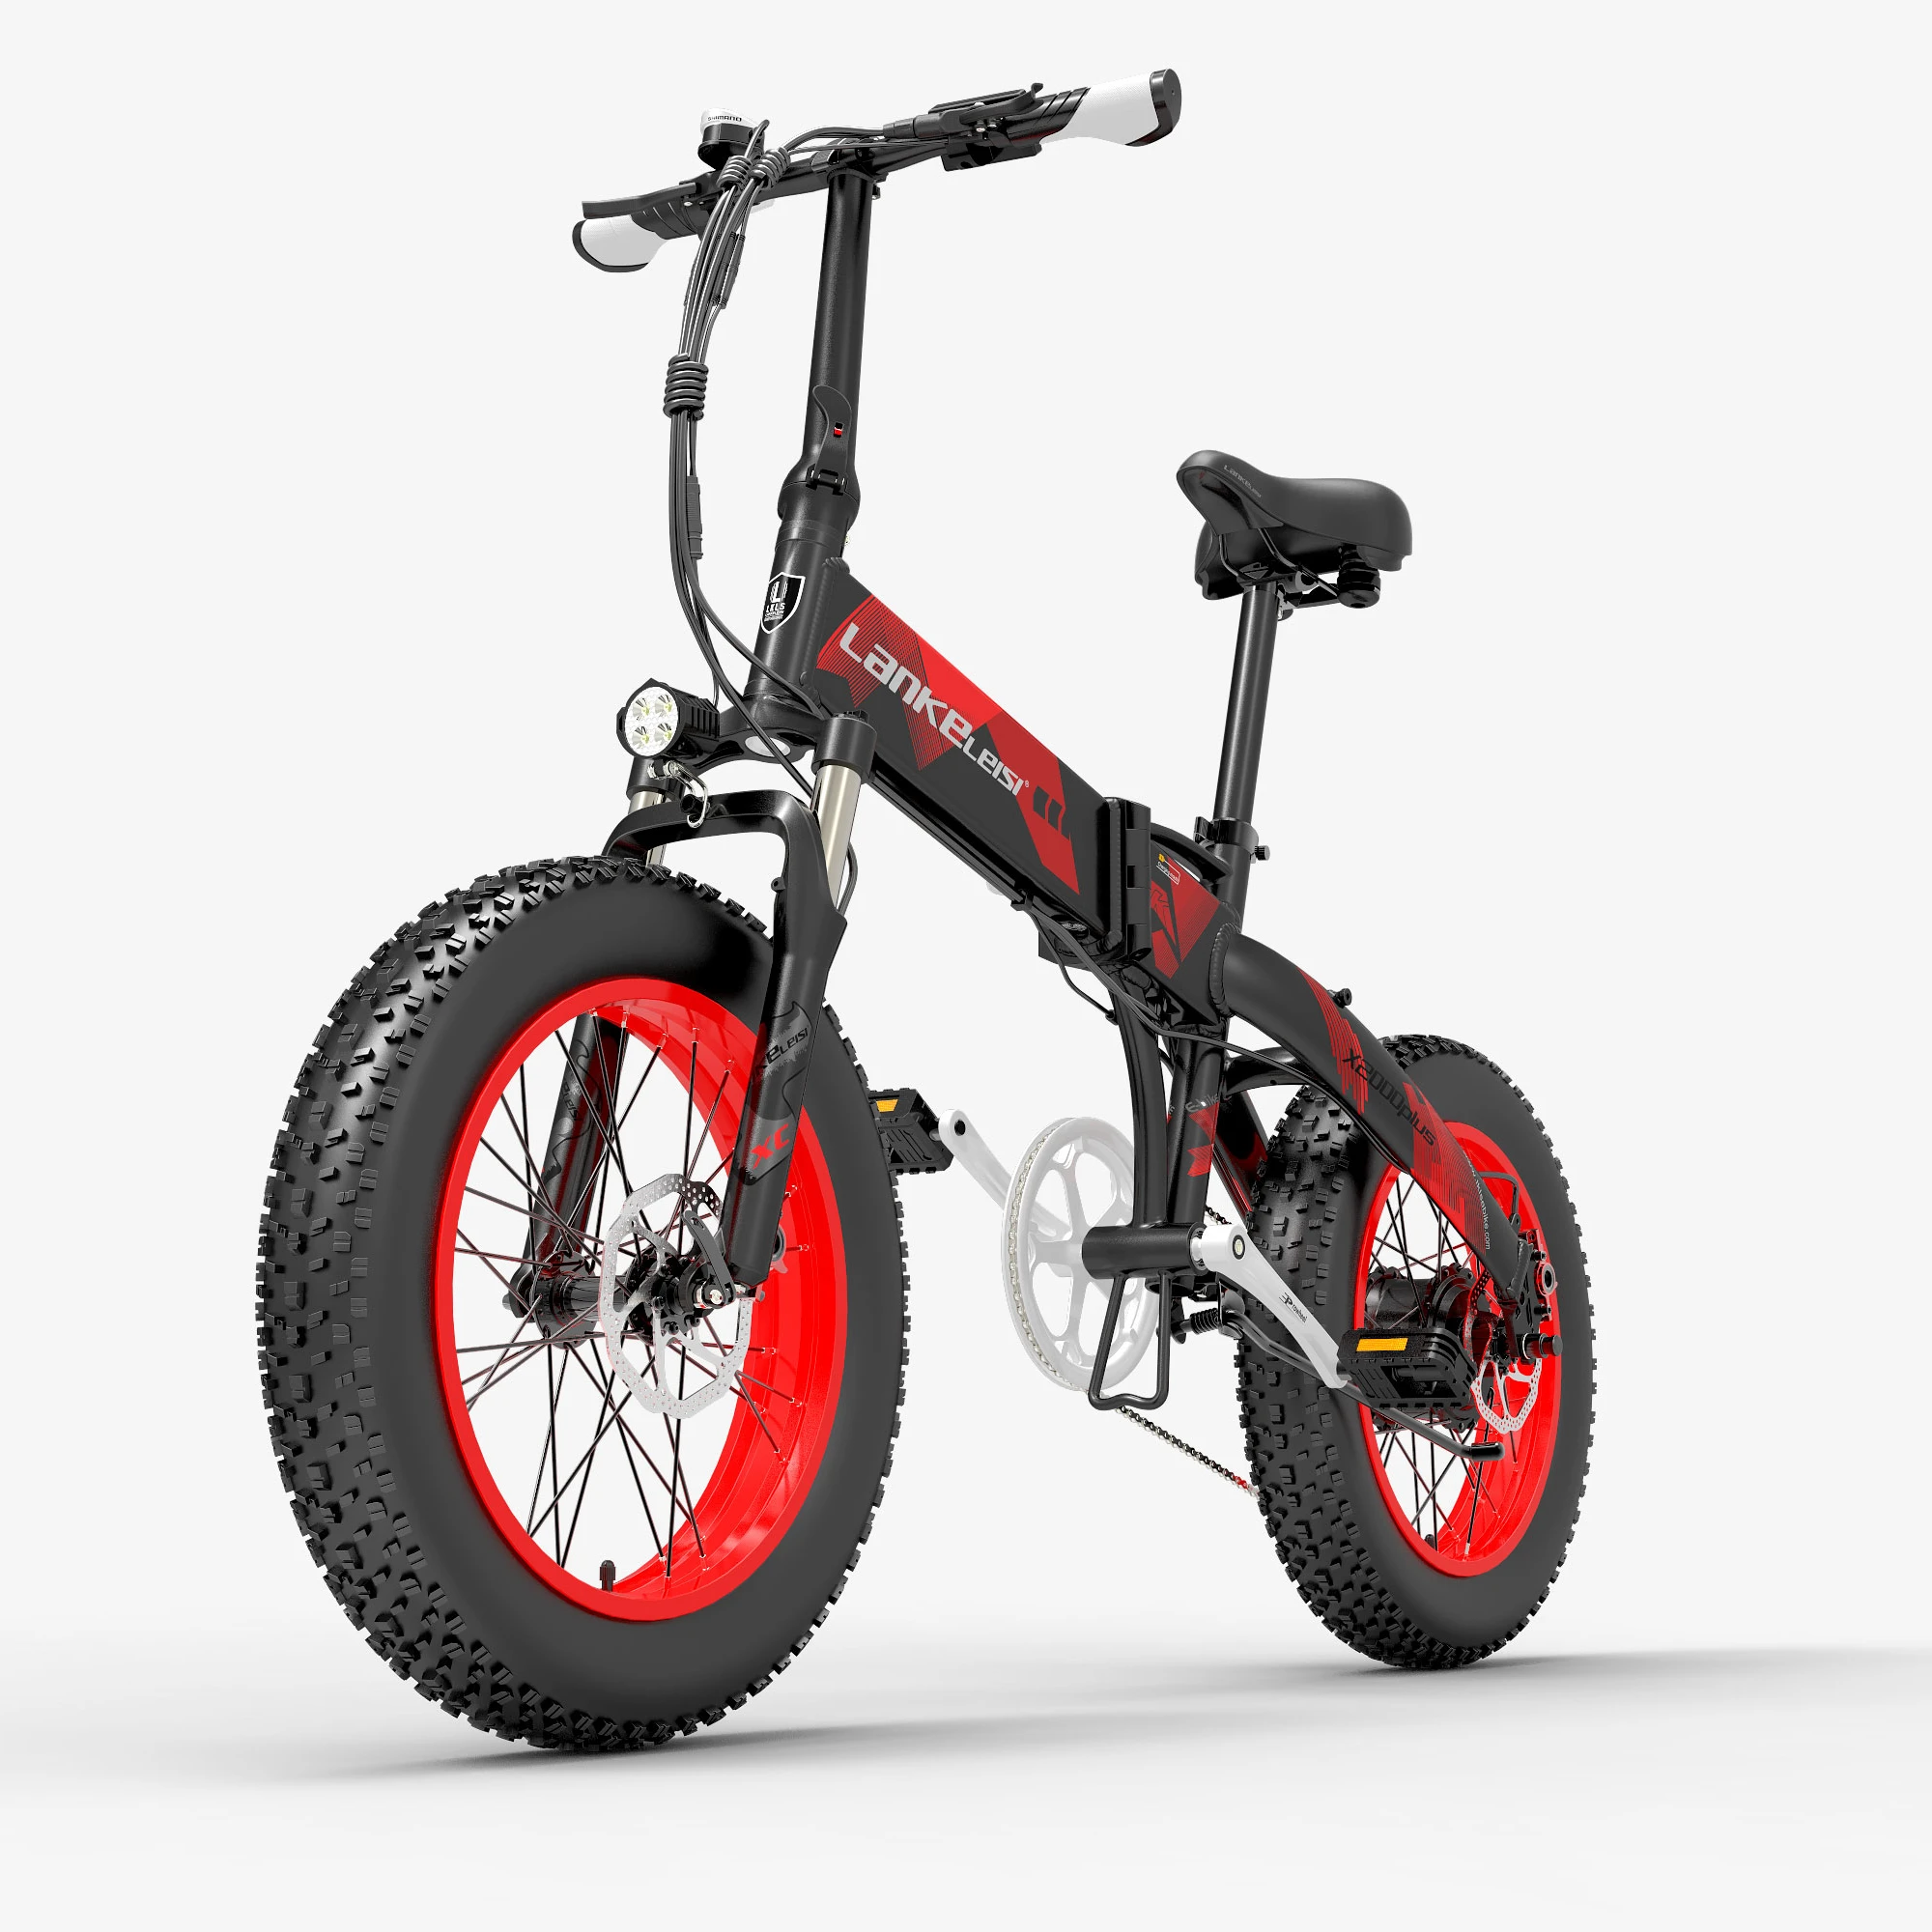 

Free shipping LANKELEISI X2000PLUS 1000w 20" foldable electric mountain bike for adult EU 48V 12.8Ah 7 speed electric city ebike, Black red/black grey